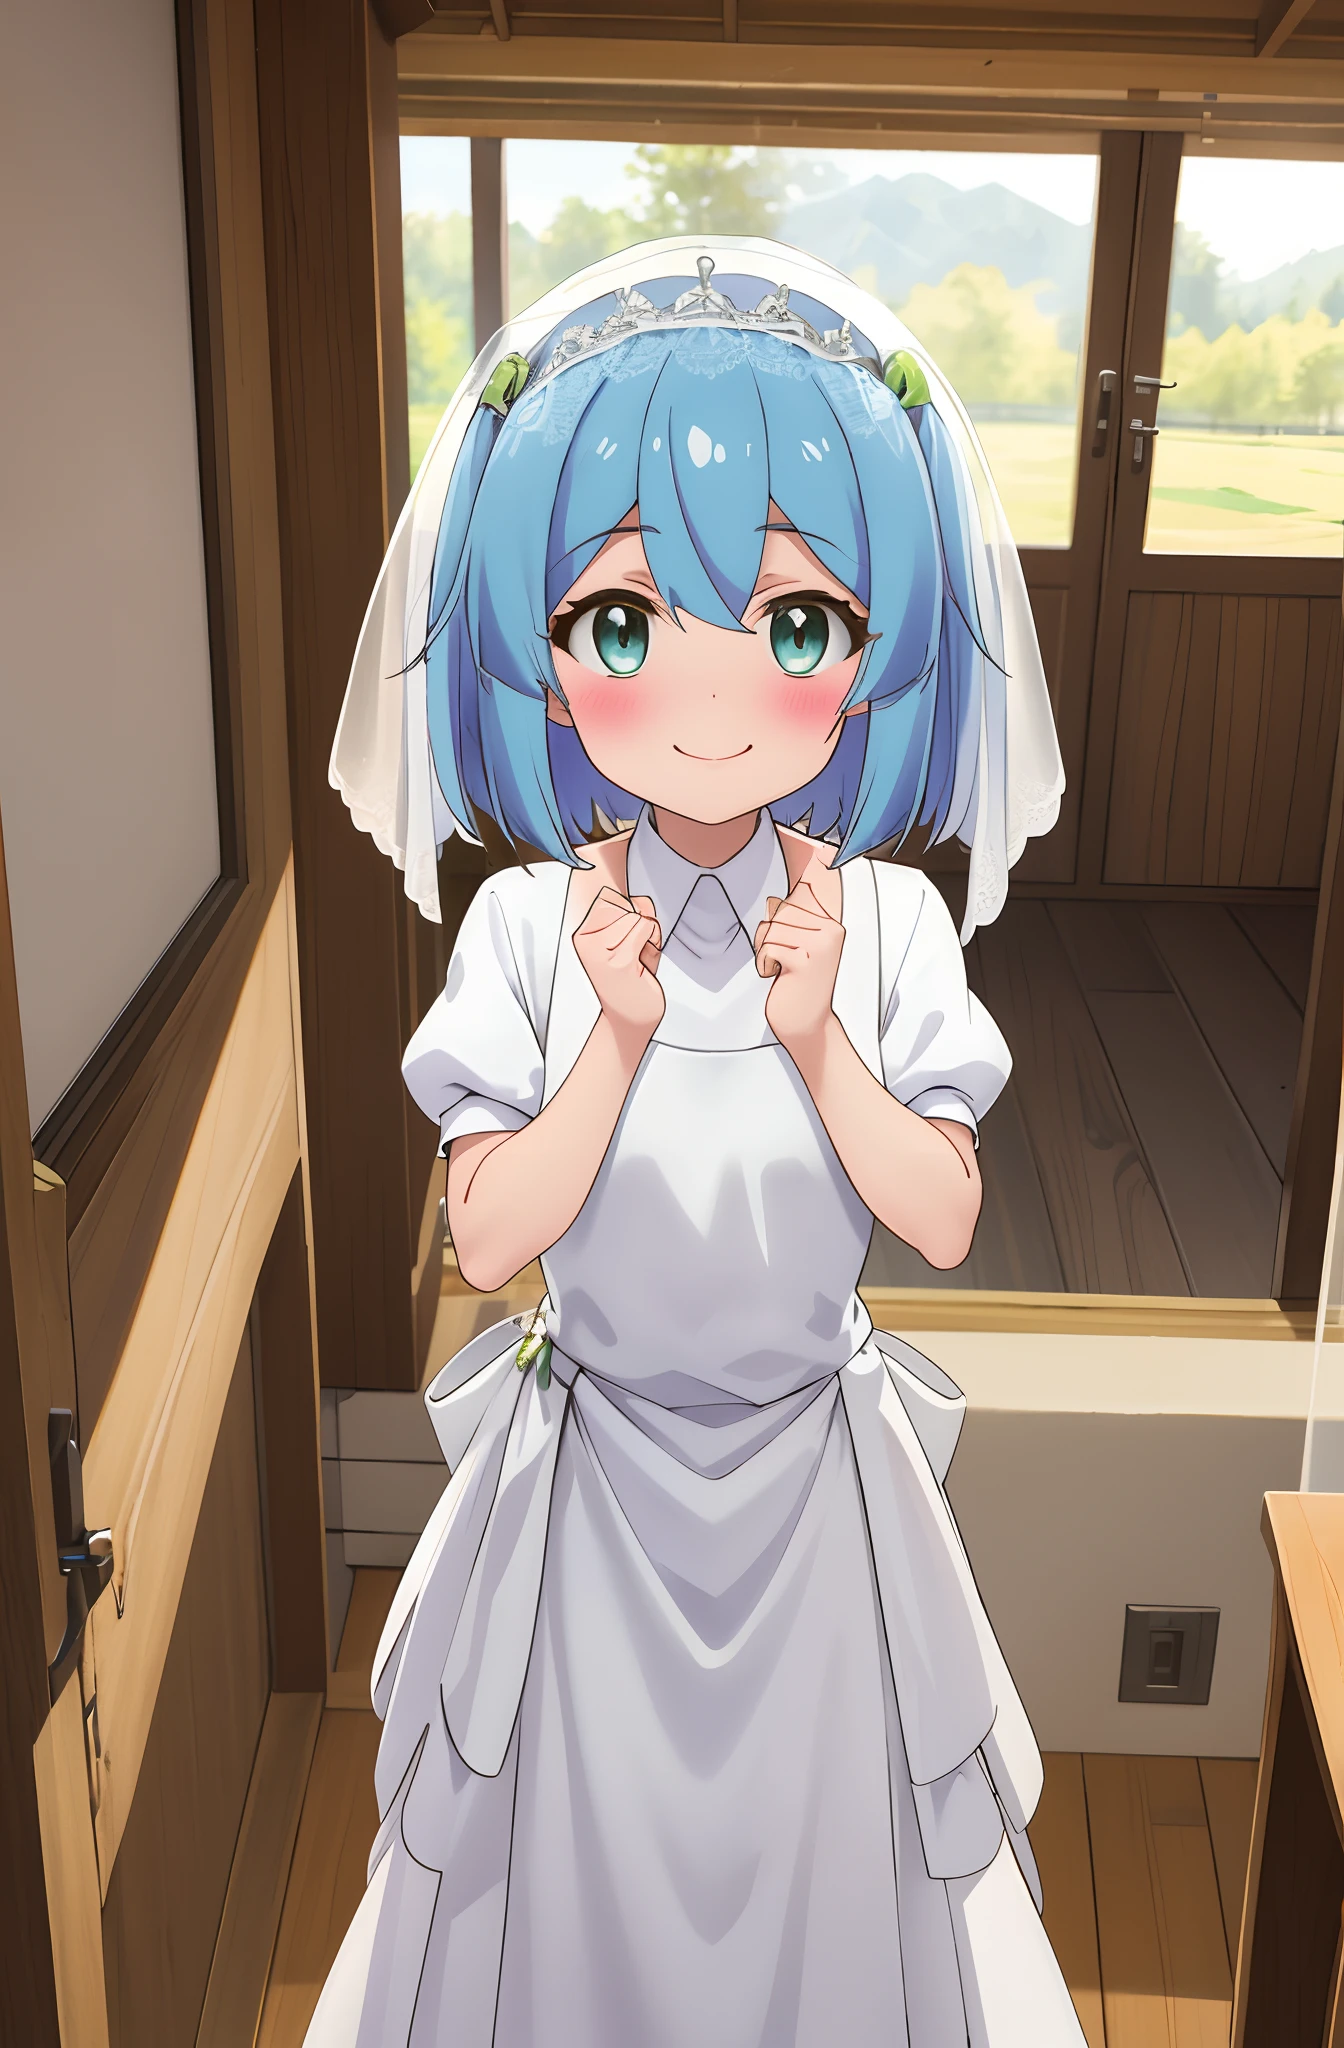 falfa, One girl with short hair, blue hair, looking at viewer, embarrassed, blushing, smile, indoor, wedding dress, bridal veil